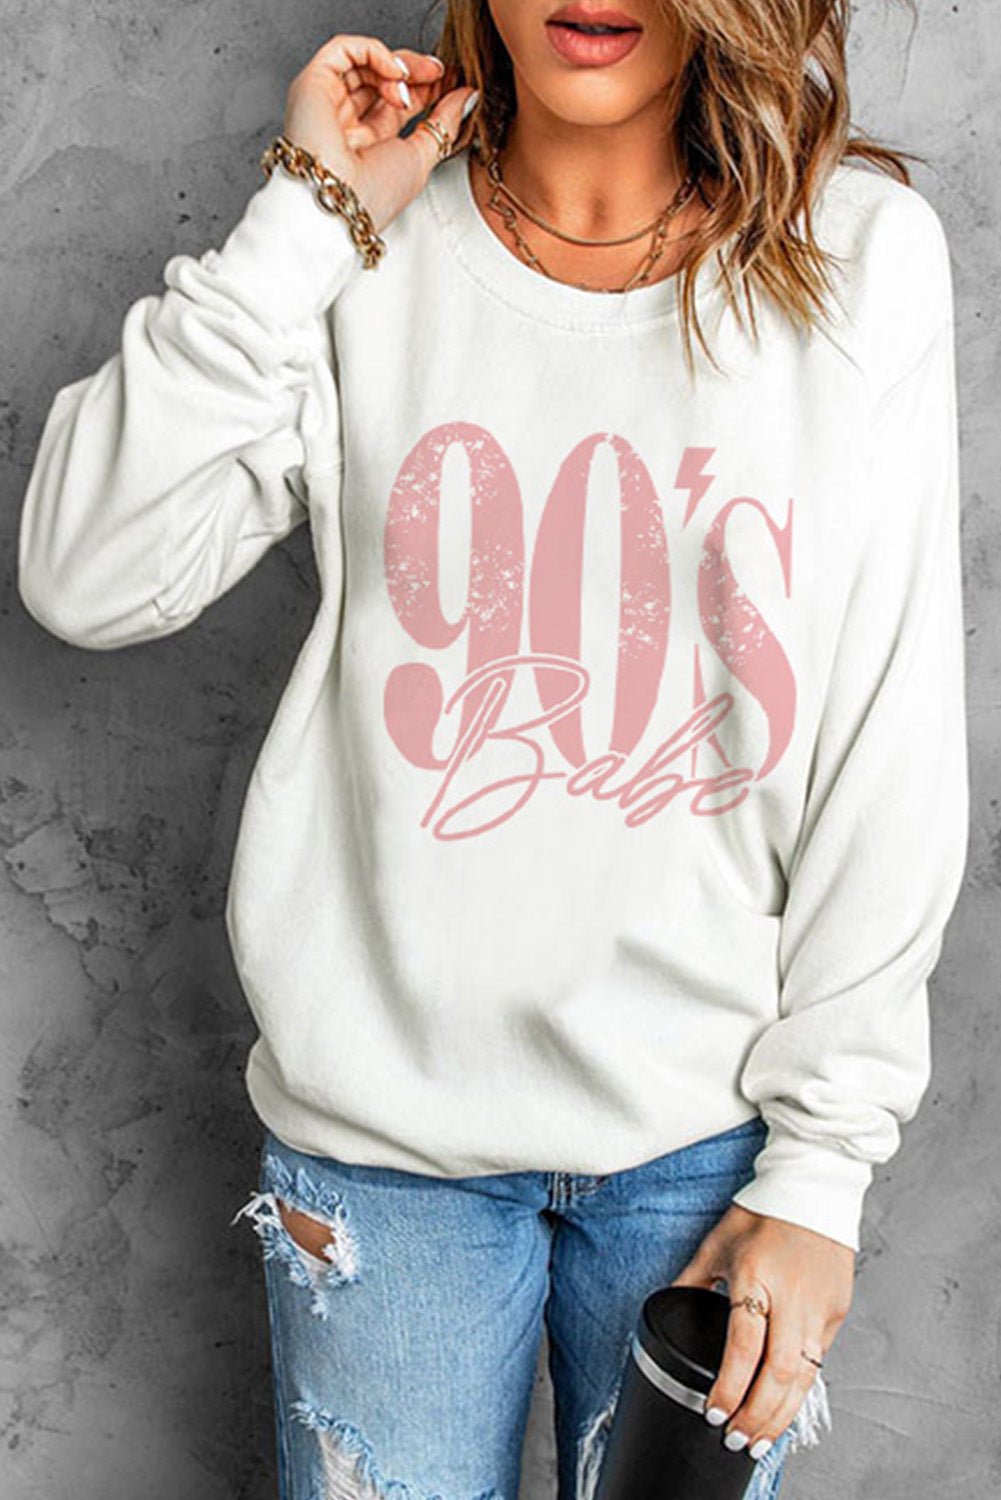 90's BABE Graphic Dropped Shoulder Sweatshirt - Fashion Girl Online Store